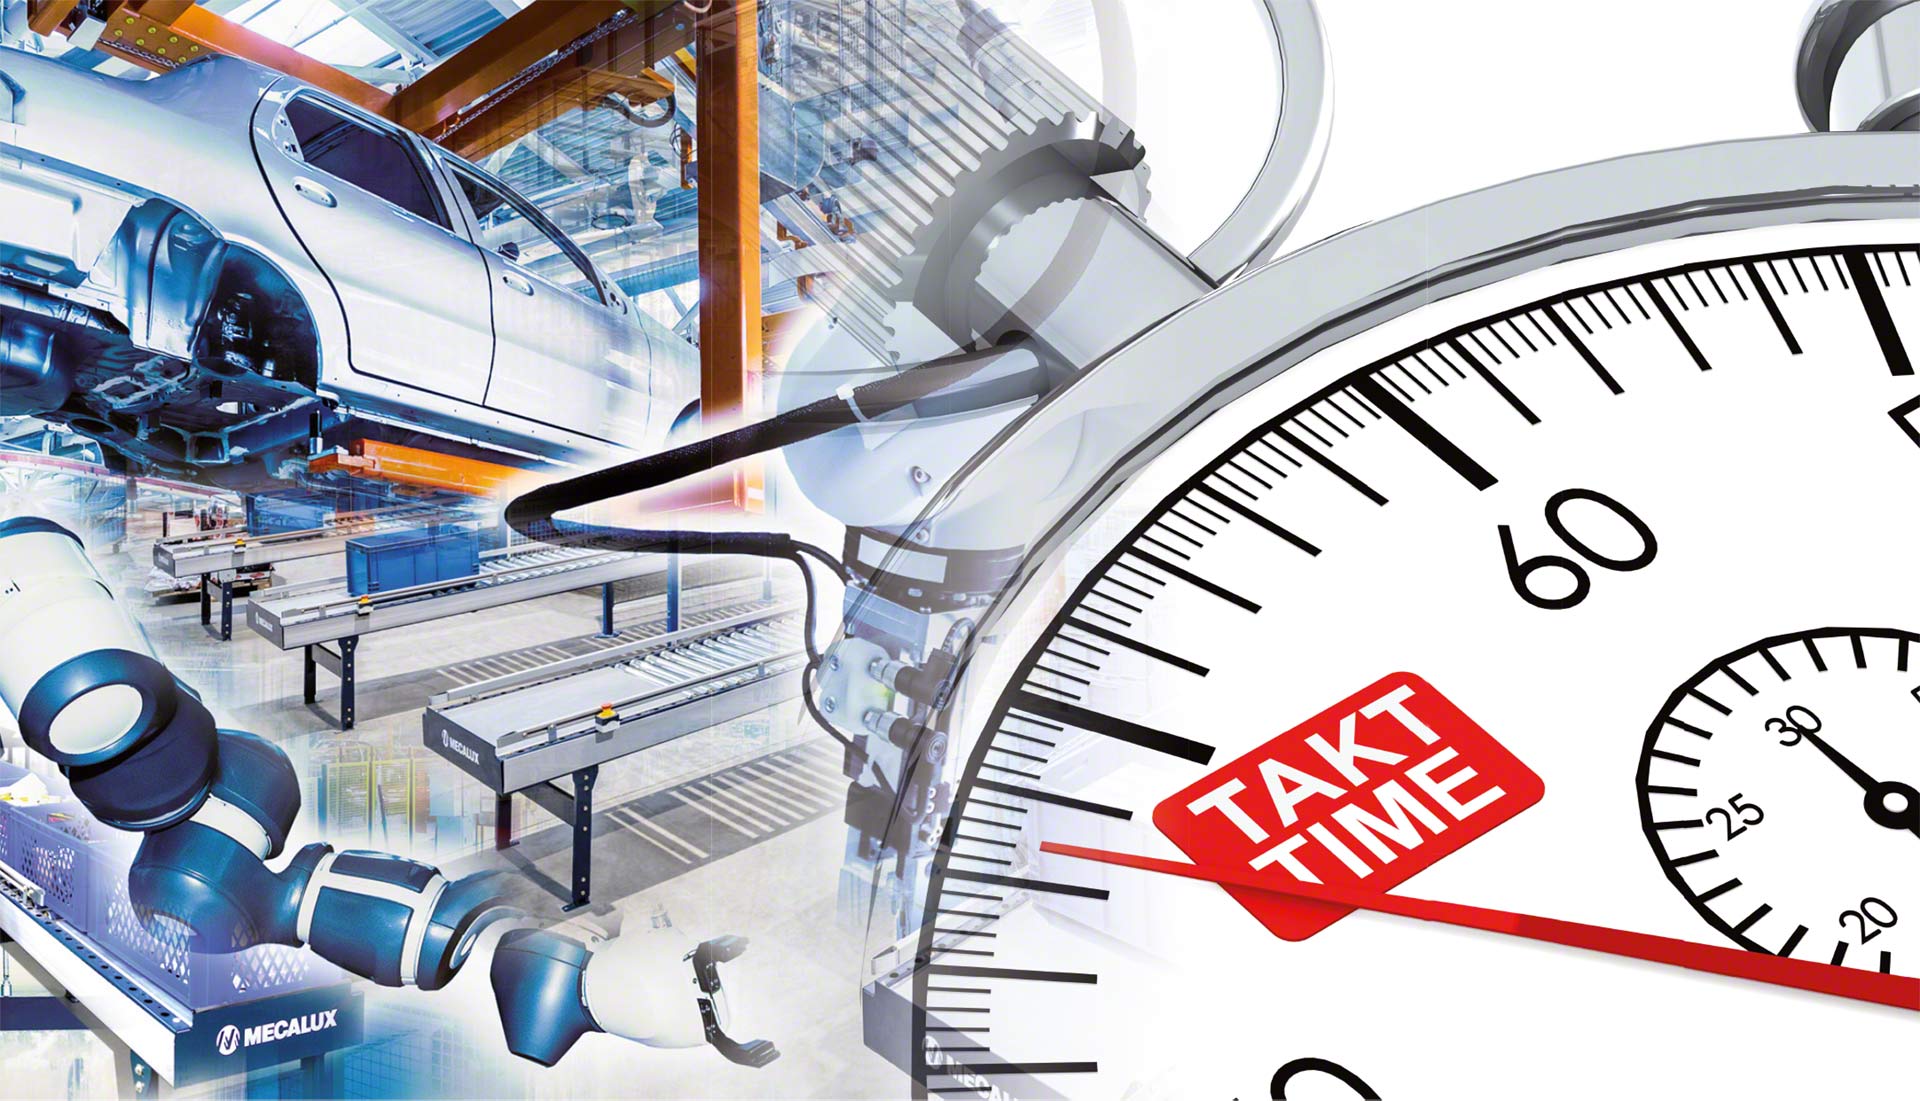 Takt time calculates the manufacturing rate a supply chain should maintain to meet demand